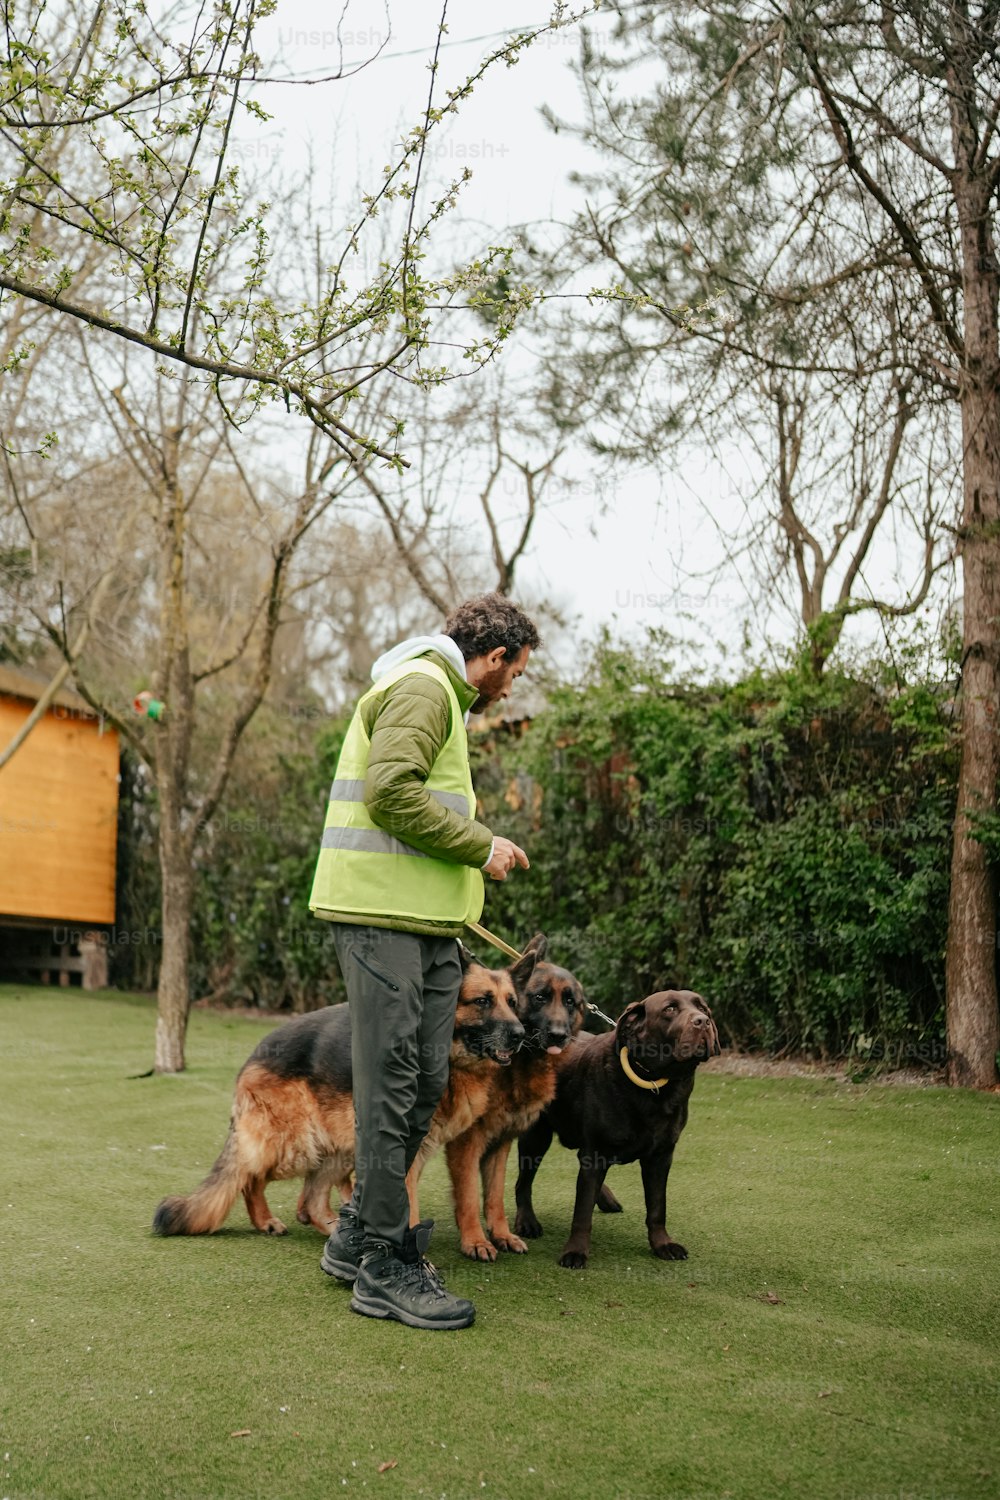 a man standing next to two dogs on a lush green field